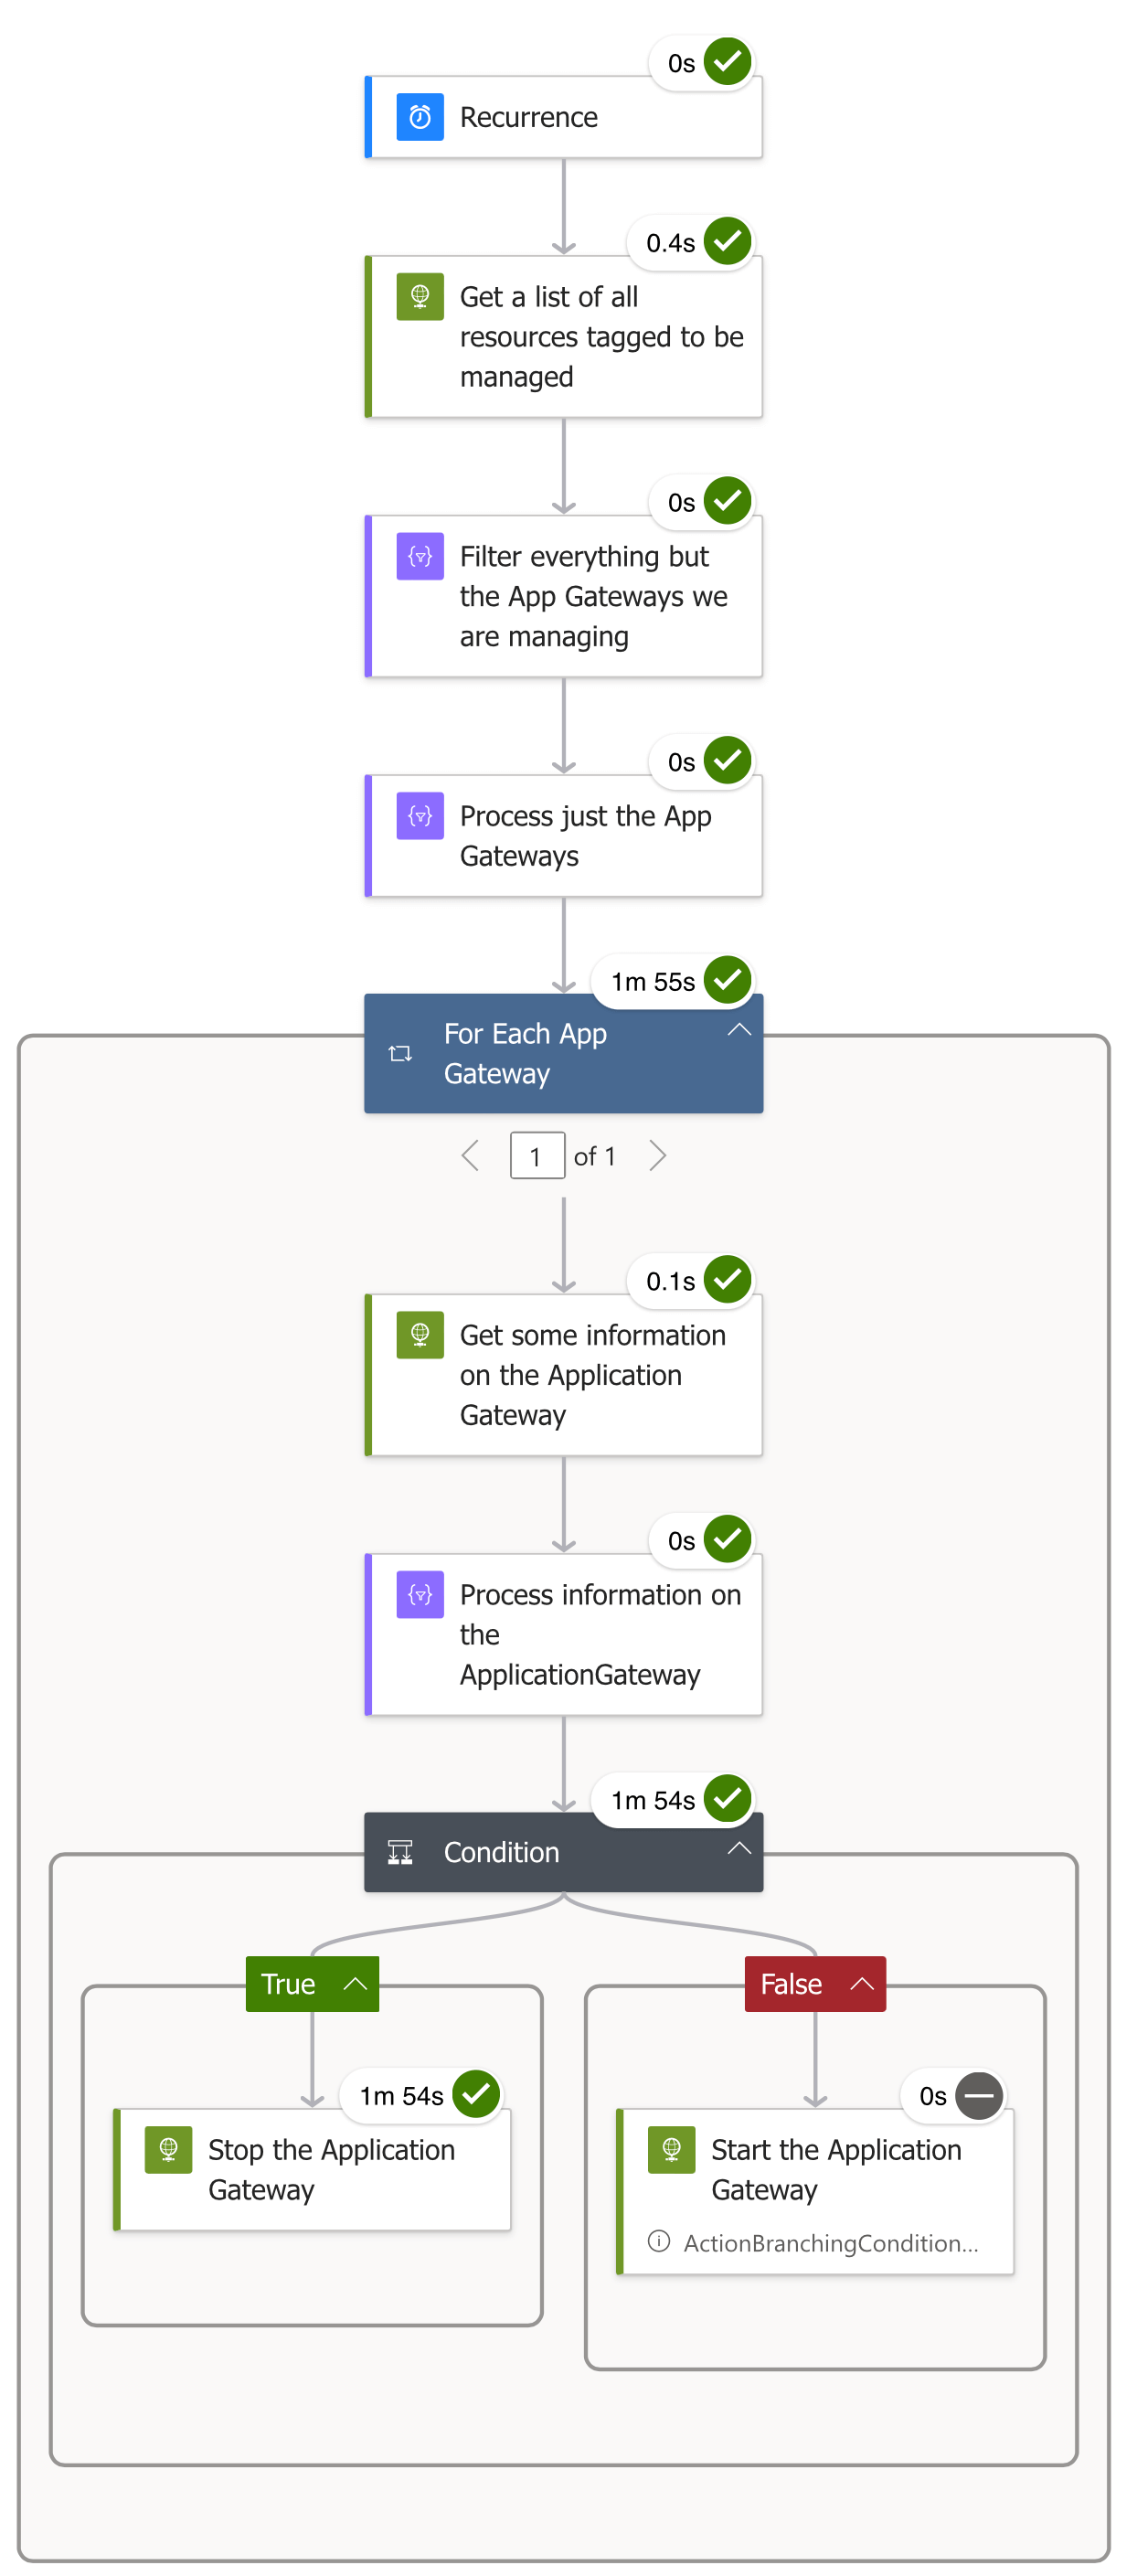 The full Application Gateway workflow